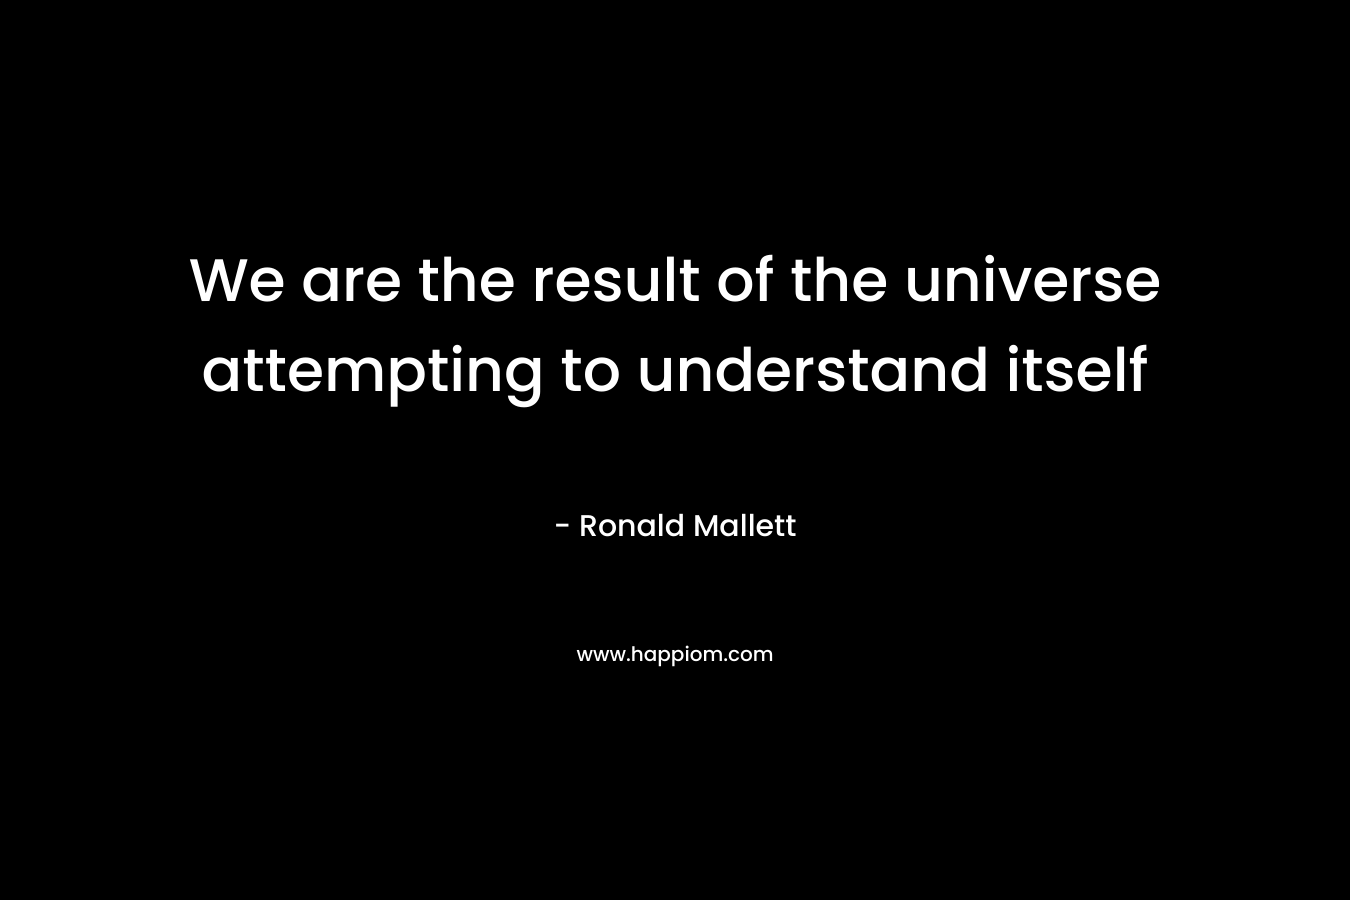 We are the result of the universe attempting to understand itself